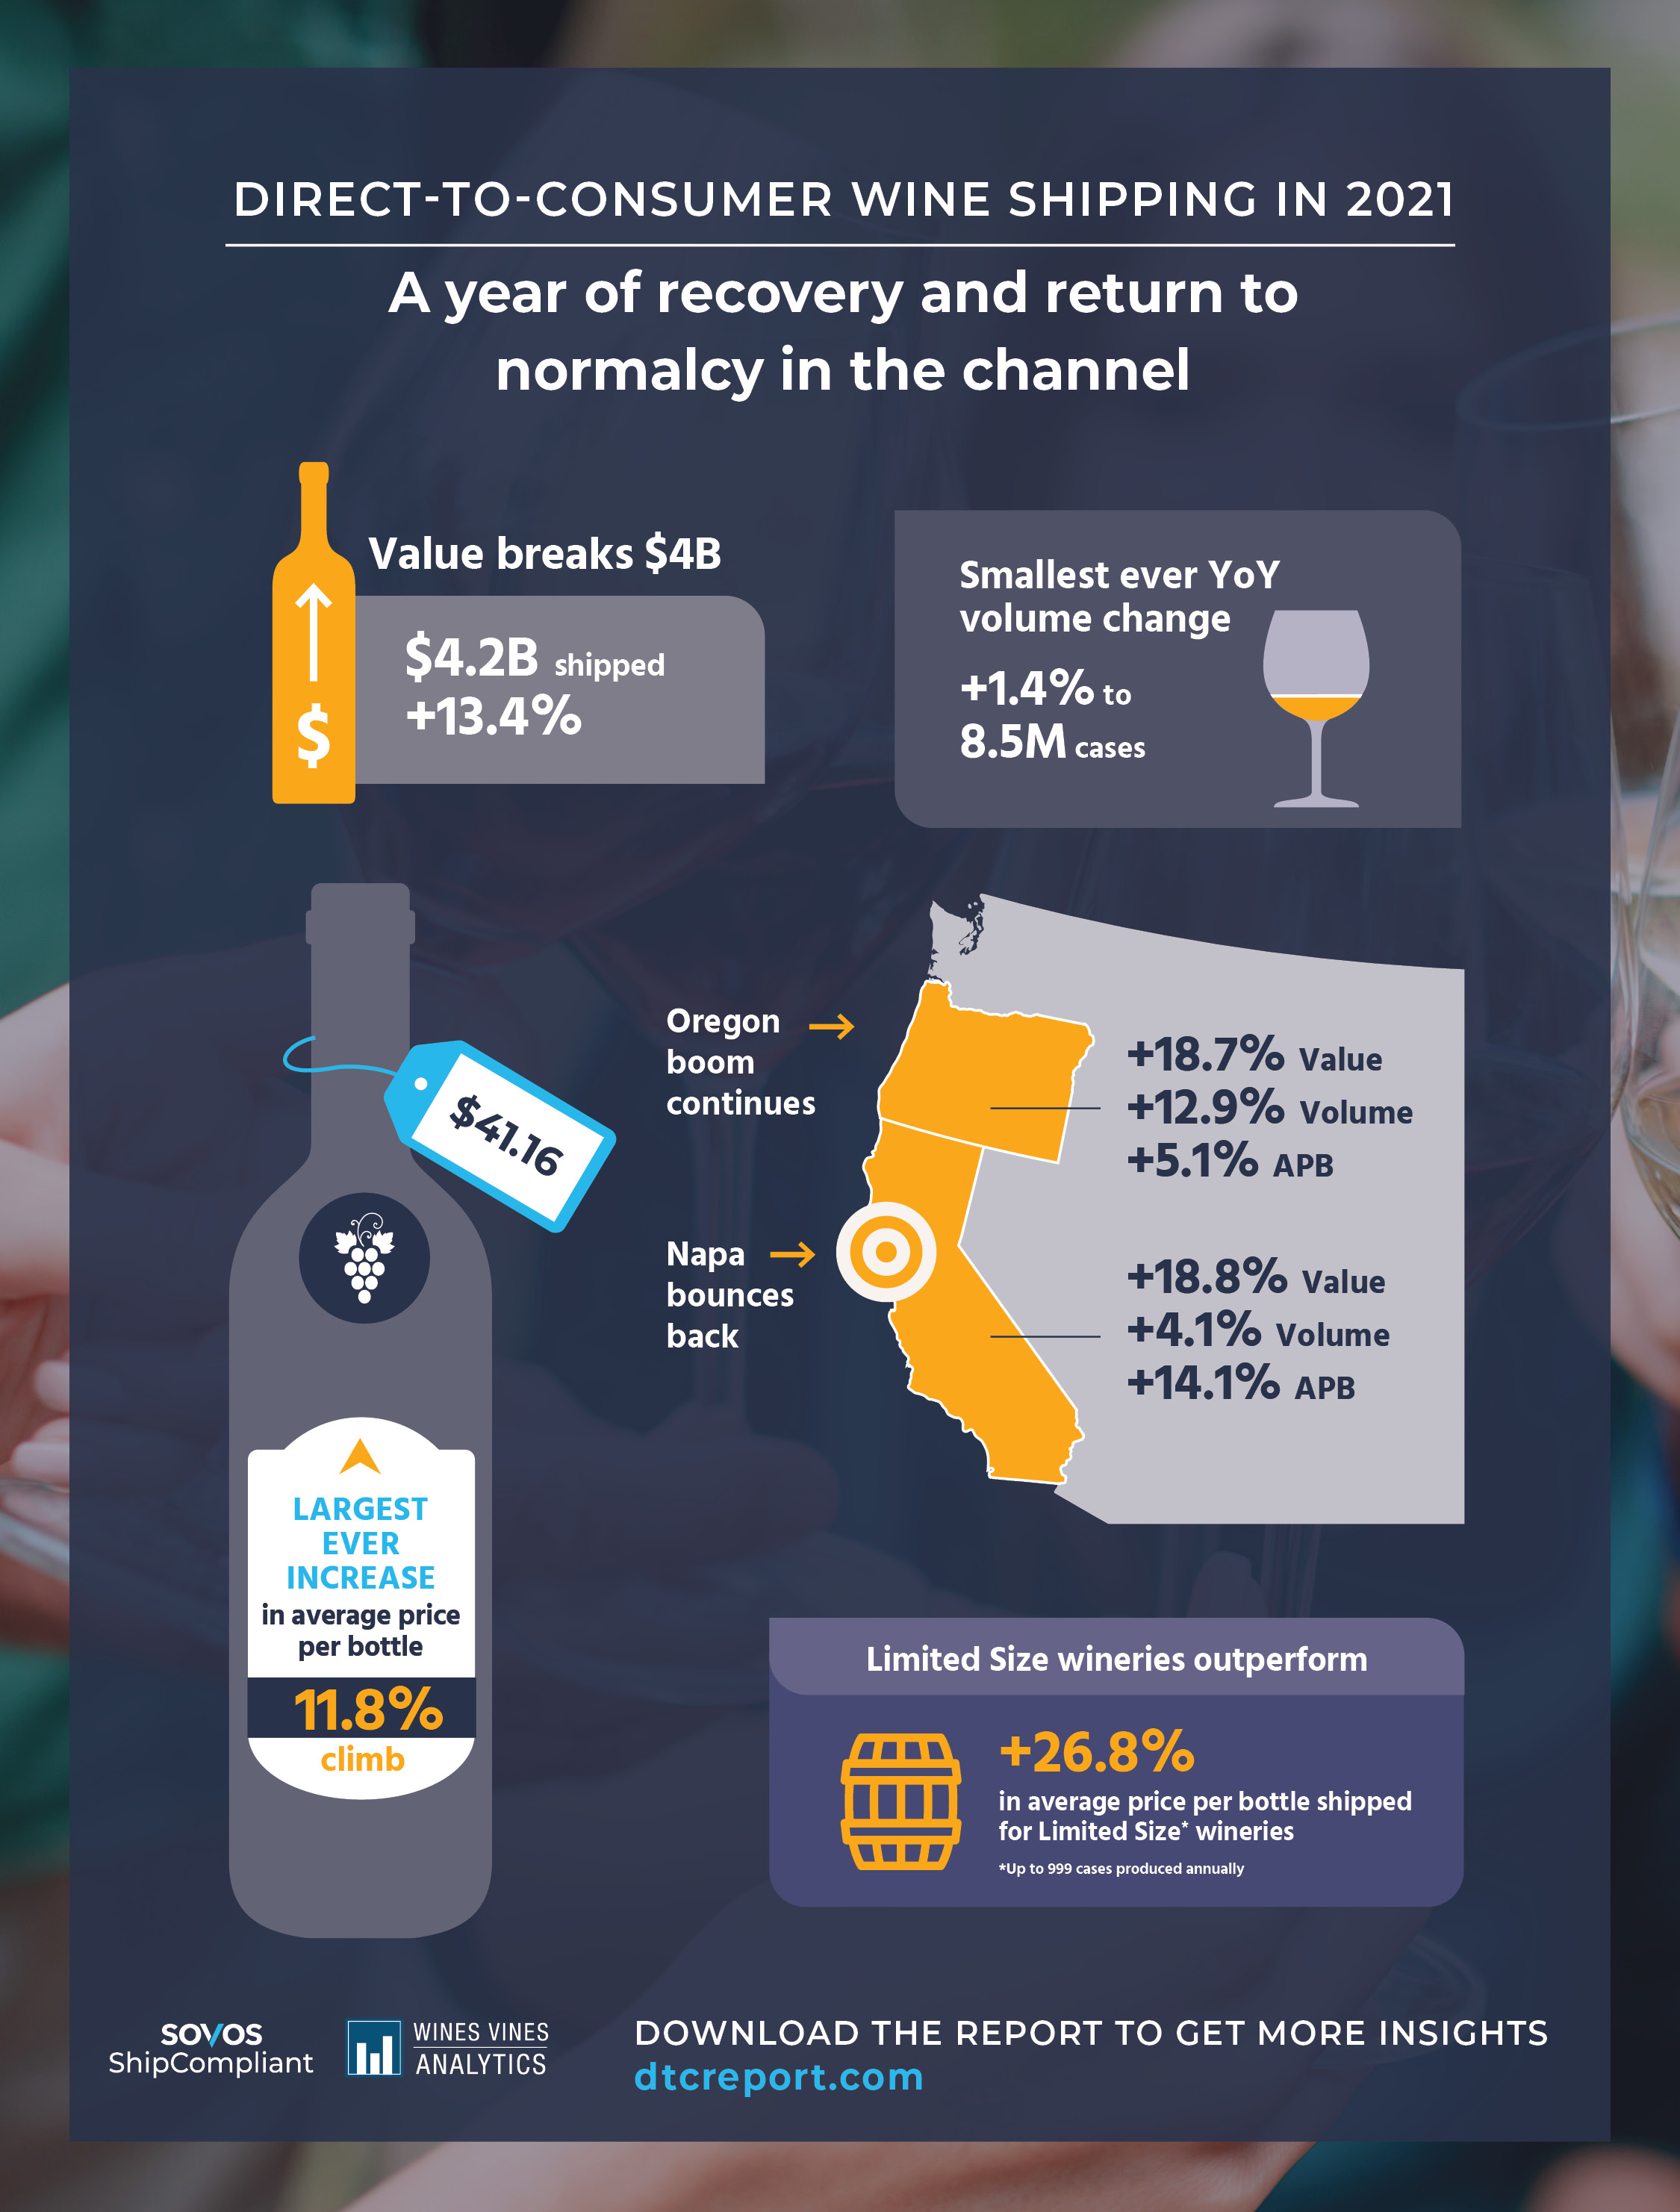 Total direct-to-consumer wine shipping surpassed the $4 billion mark for the first time in 2021.